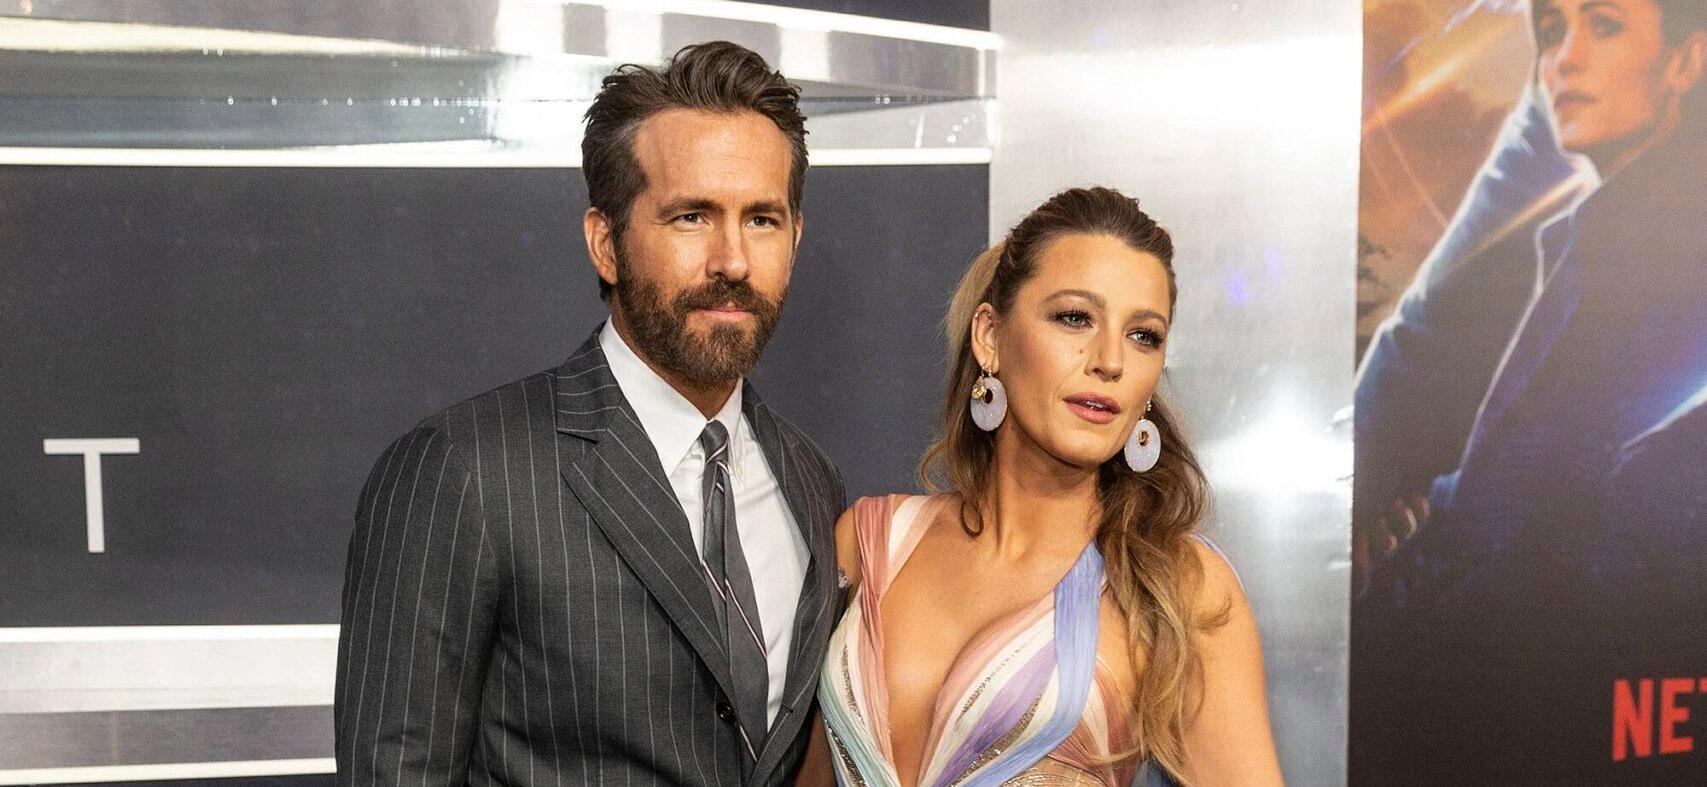 Blake Lively Thirsts Over Muscled Ryan Reynolds Supporting Her Beverage Brand